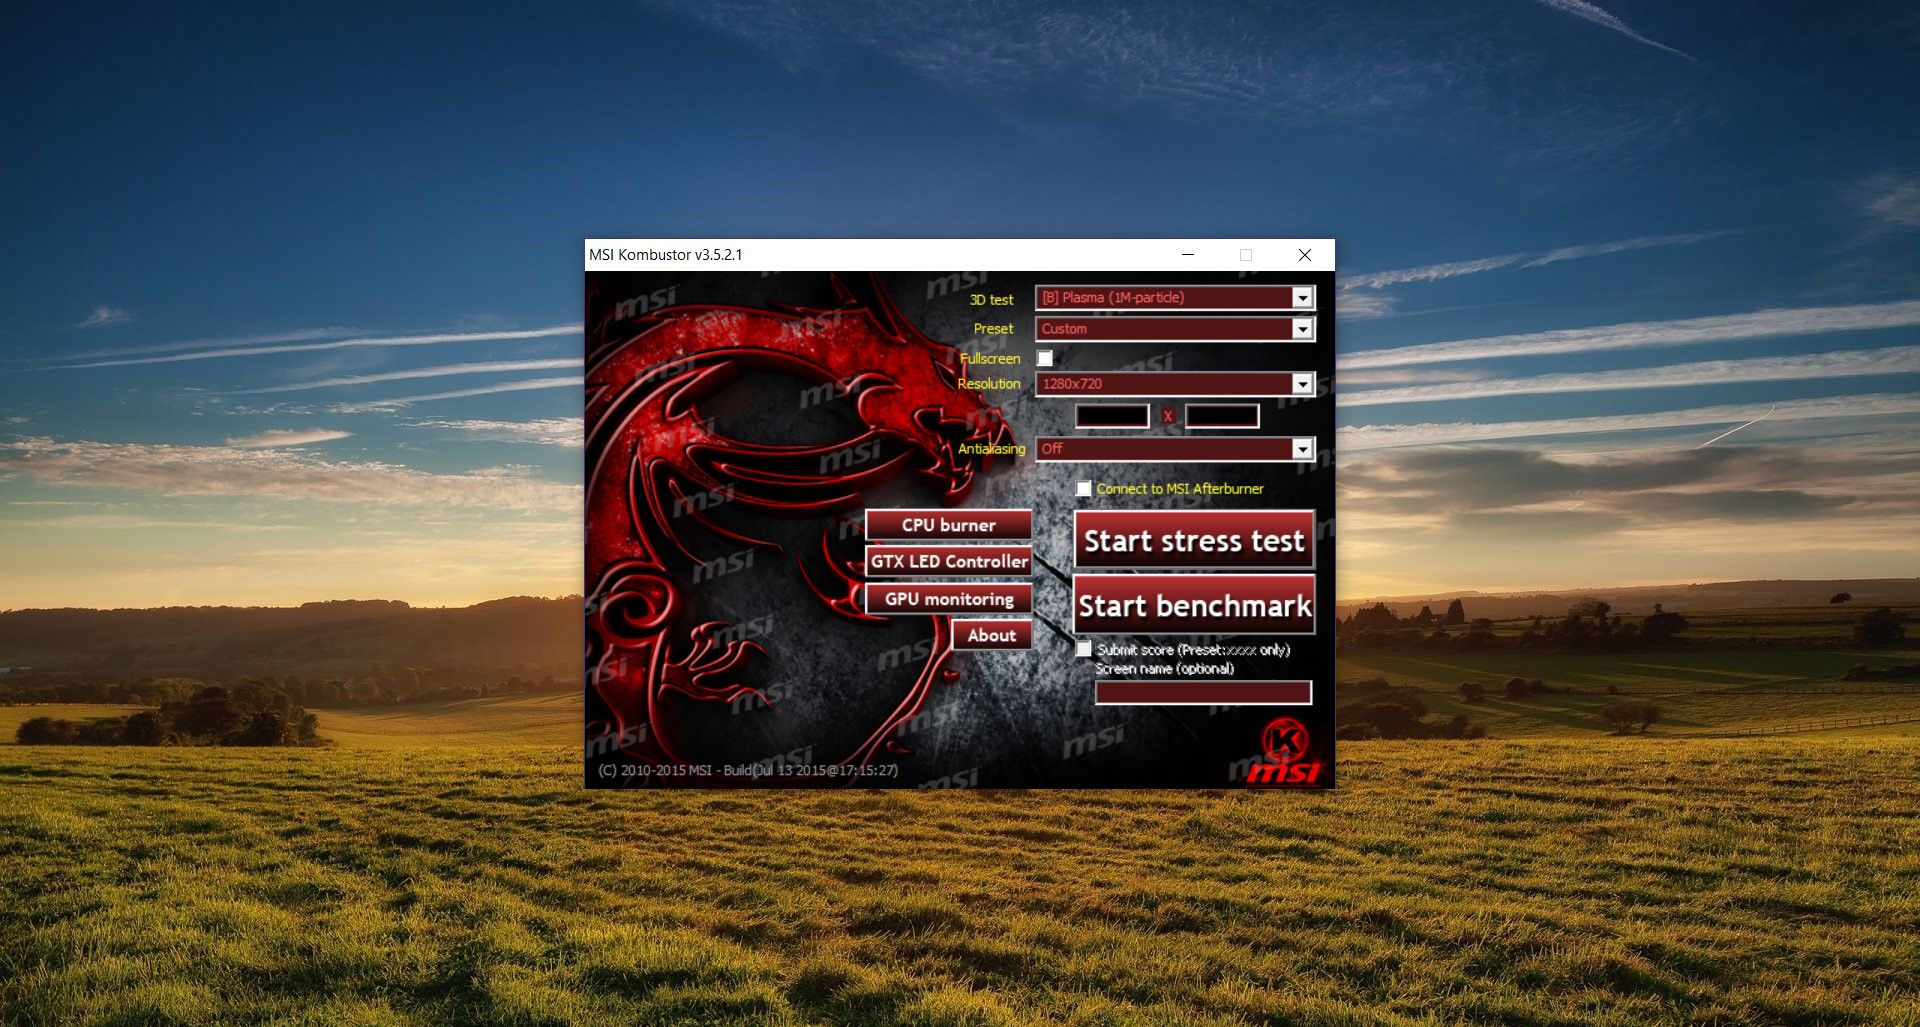 MSI Kombustor 4.1.27 instal the last version for android